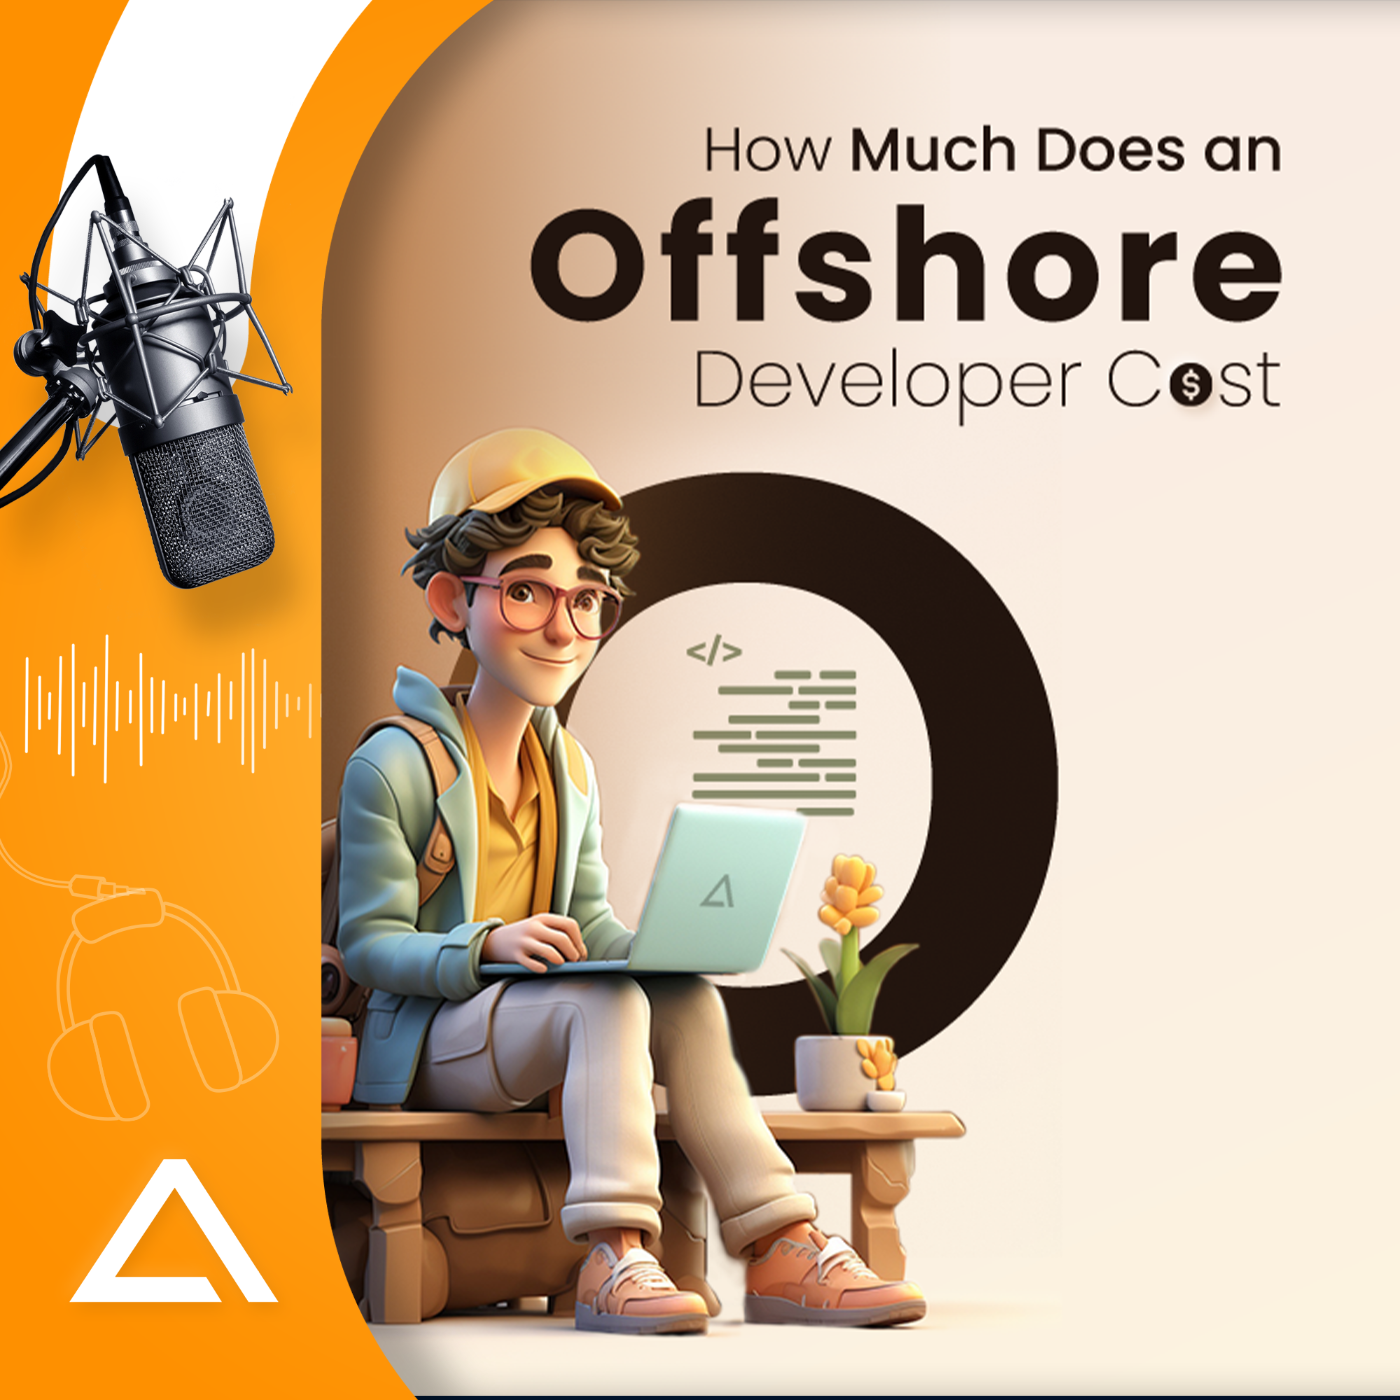 How Much Does an Offshore Developer Cost